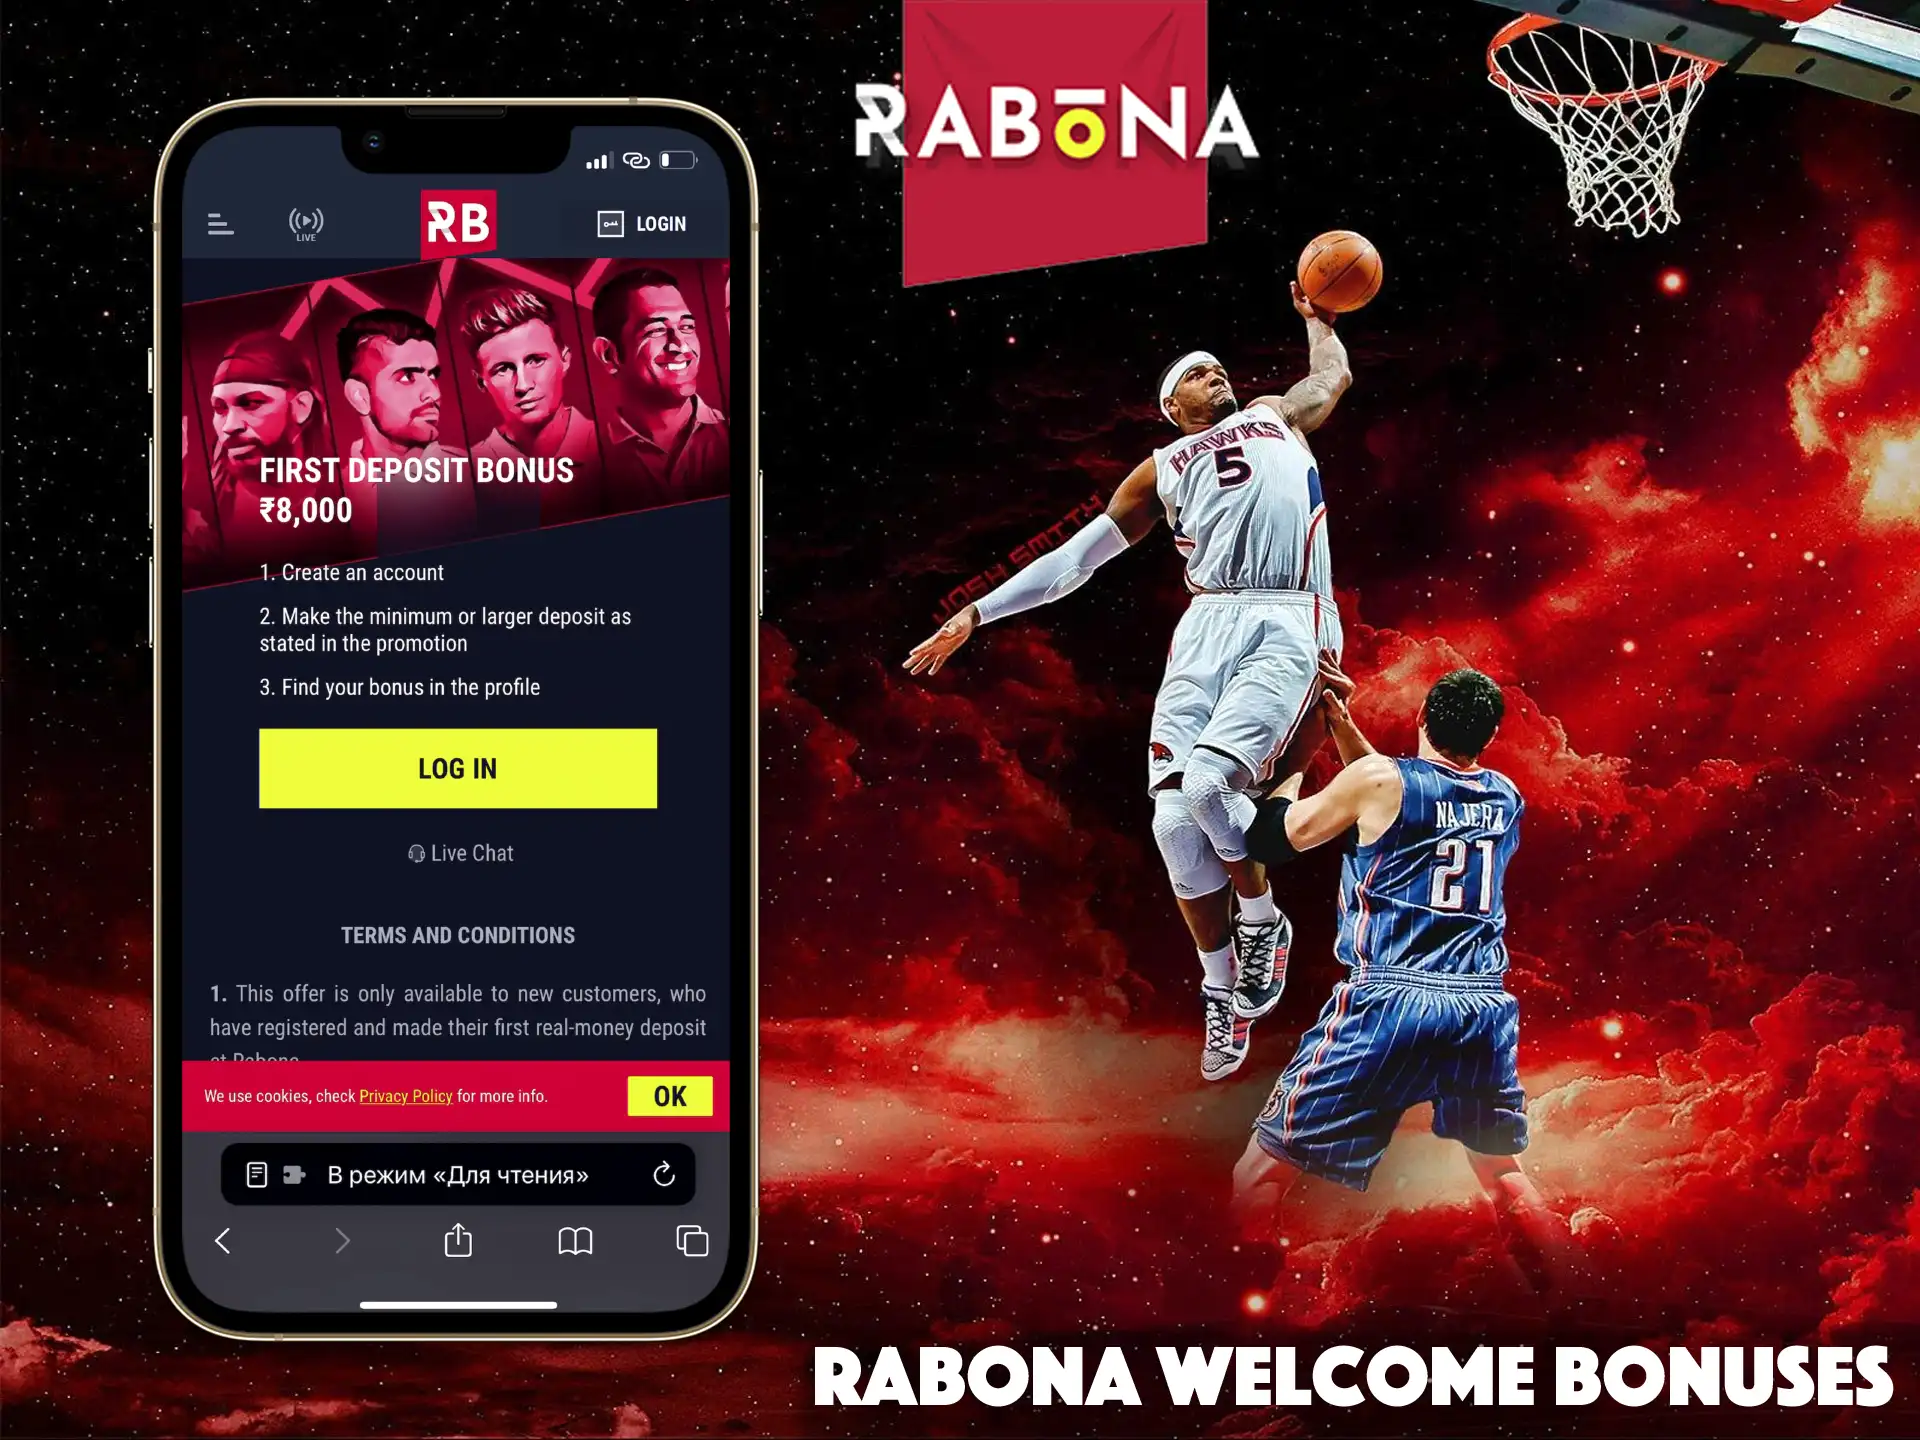 How to get a bonus when registering with Rabona.